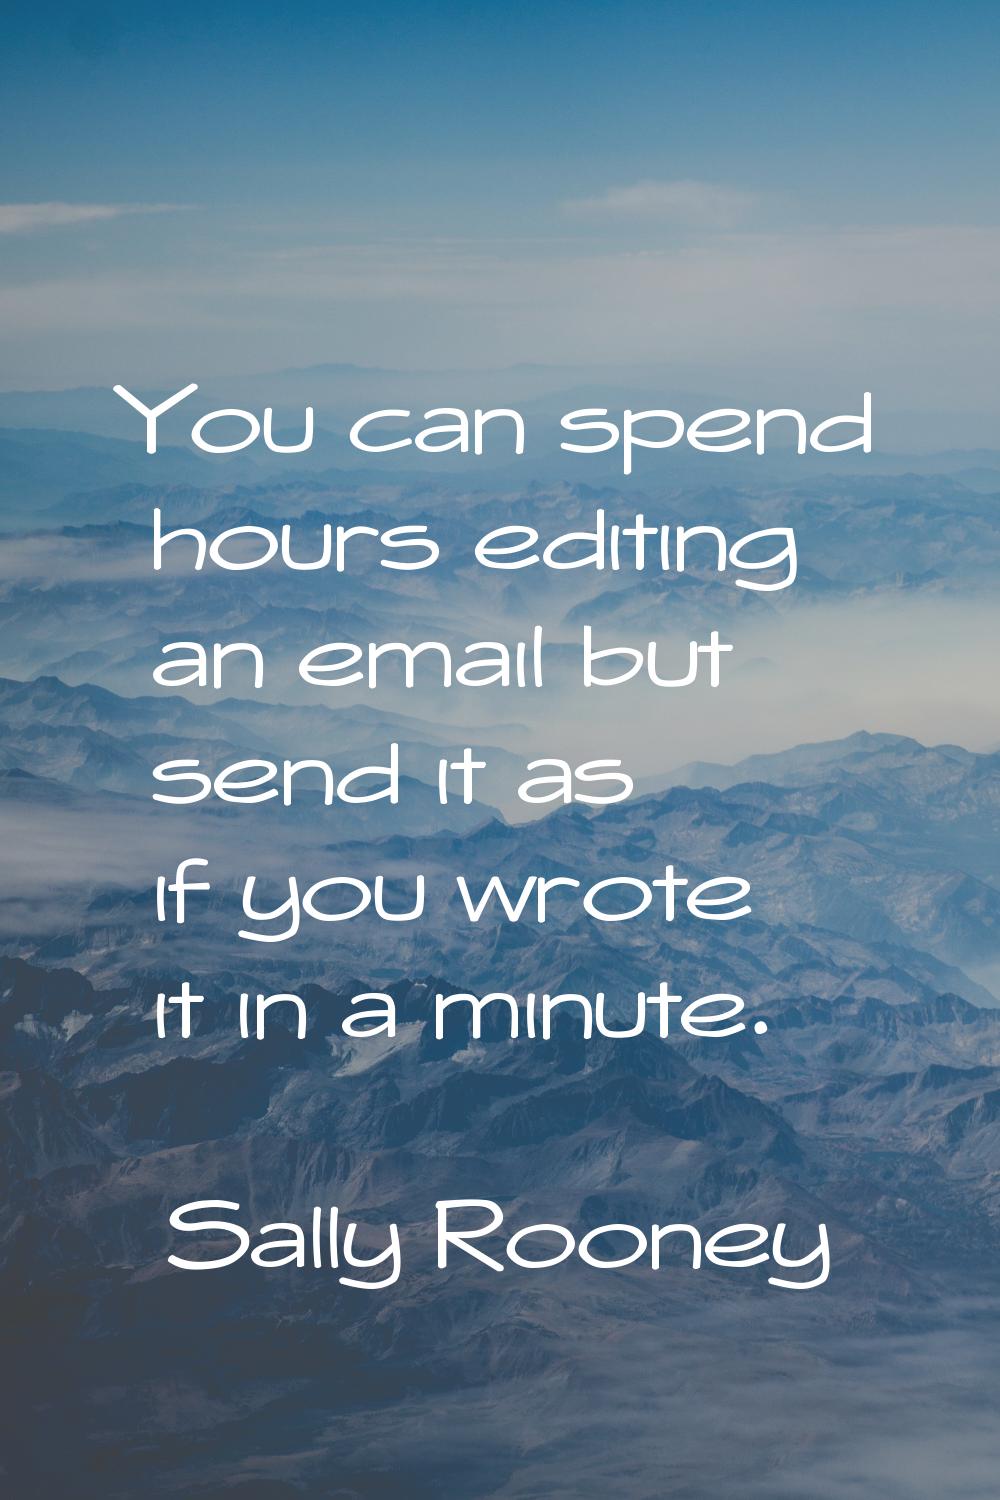 You can spend hours editing an email but send it as if you wrote it in a minute.